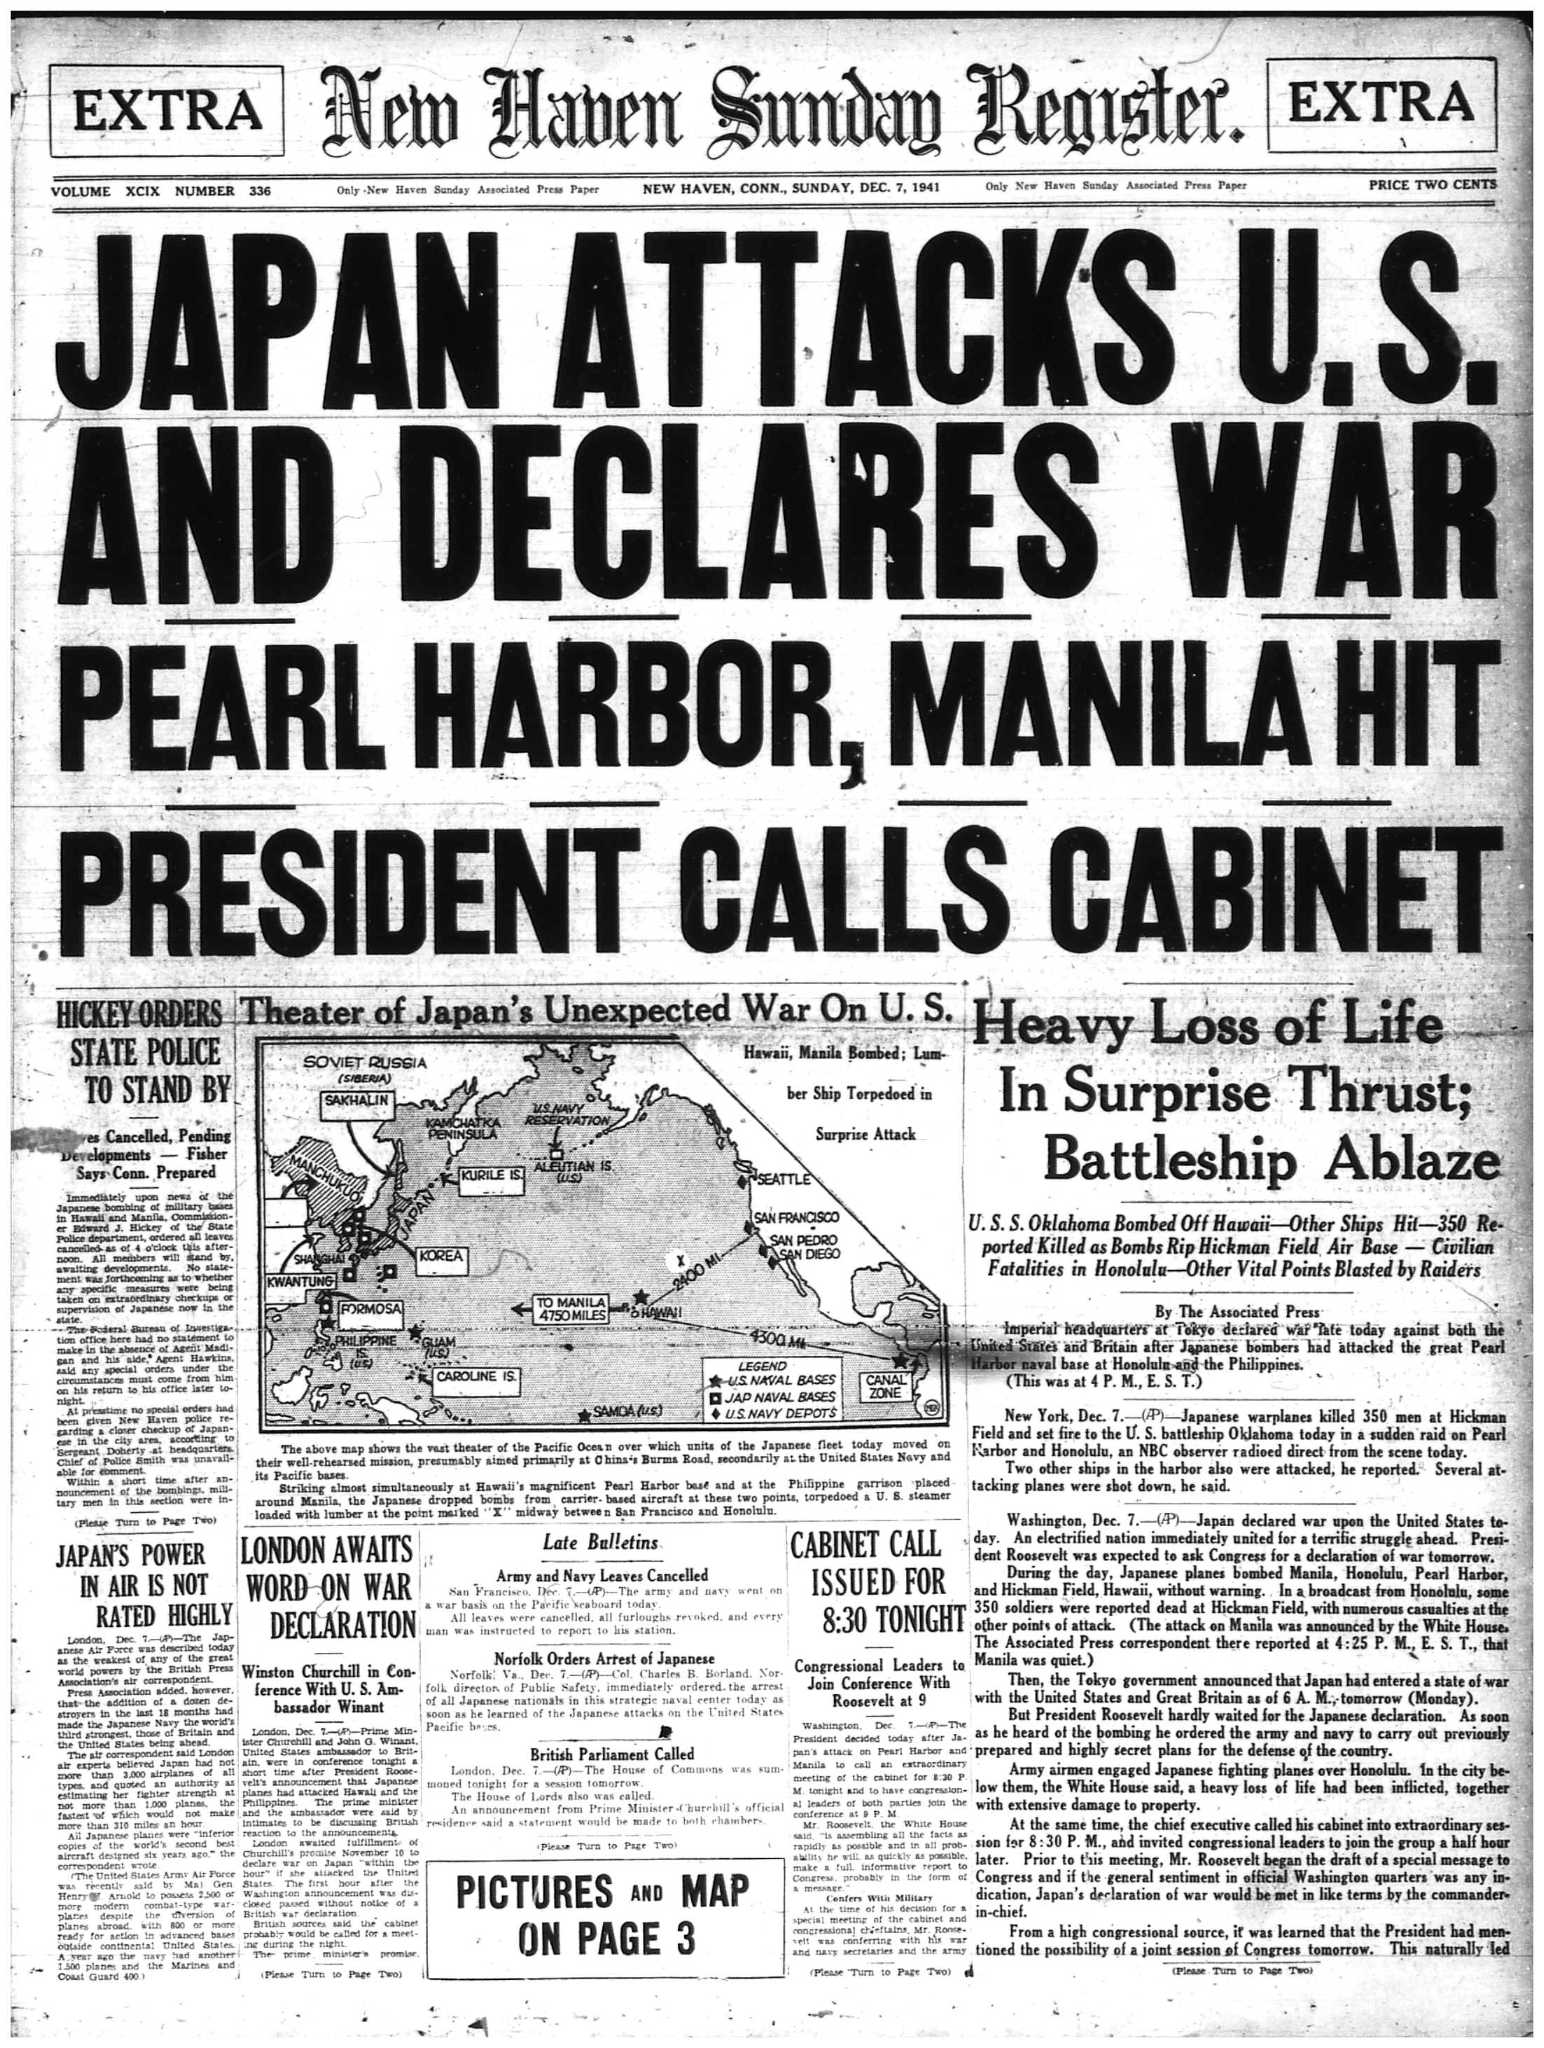 Dec. 7, 1941: The day our world changed - Midland Daily News